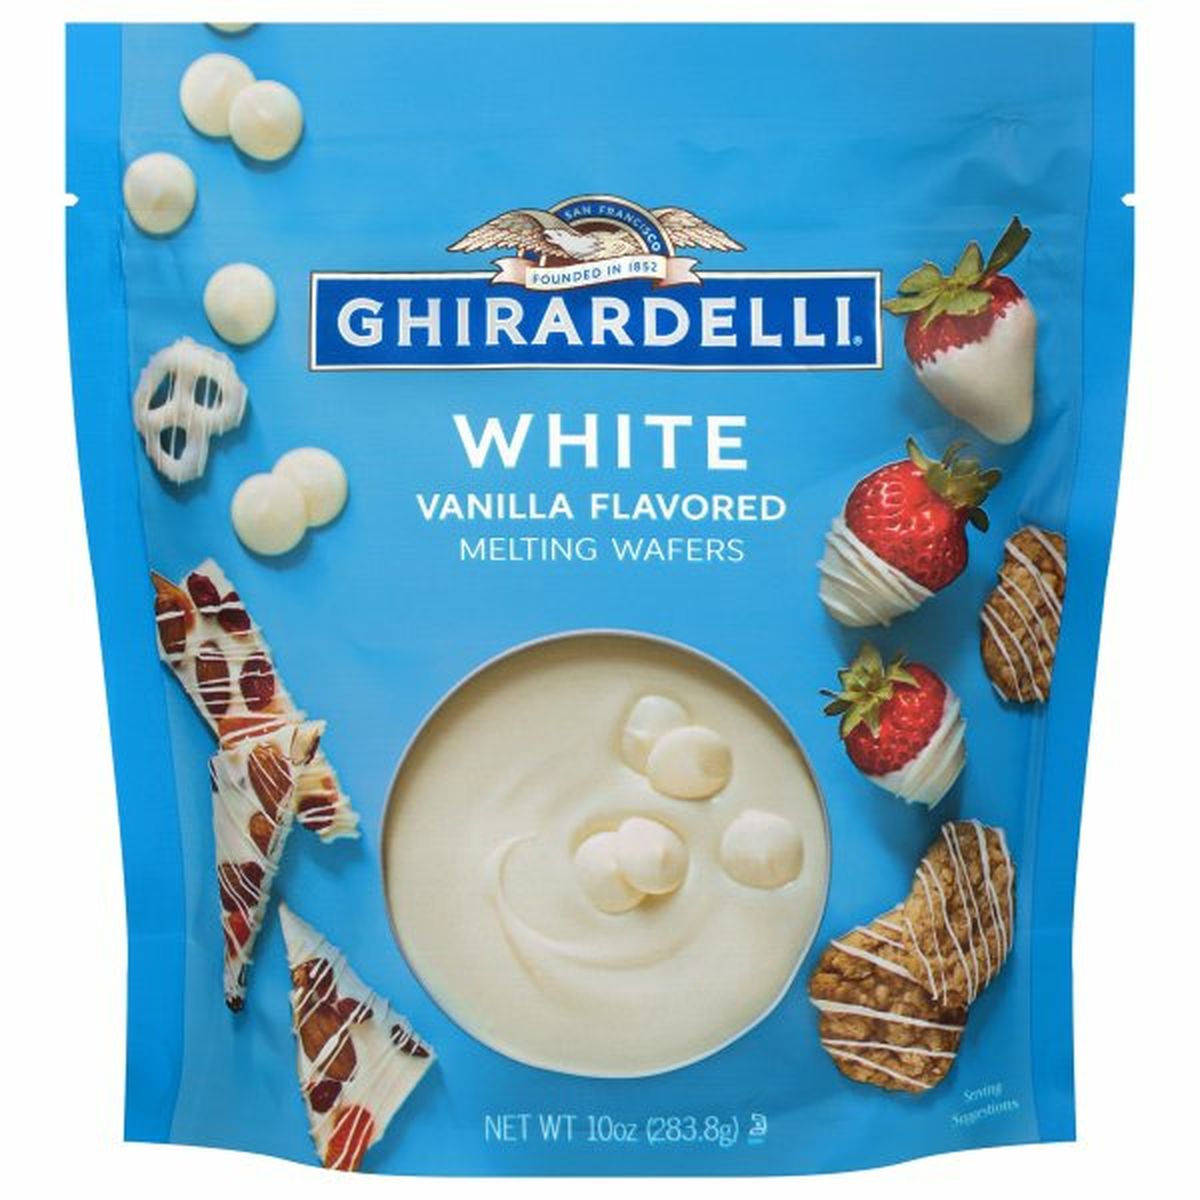 Calories in Ghirardelli White Melting Wafers, Vanilla Flavored